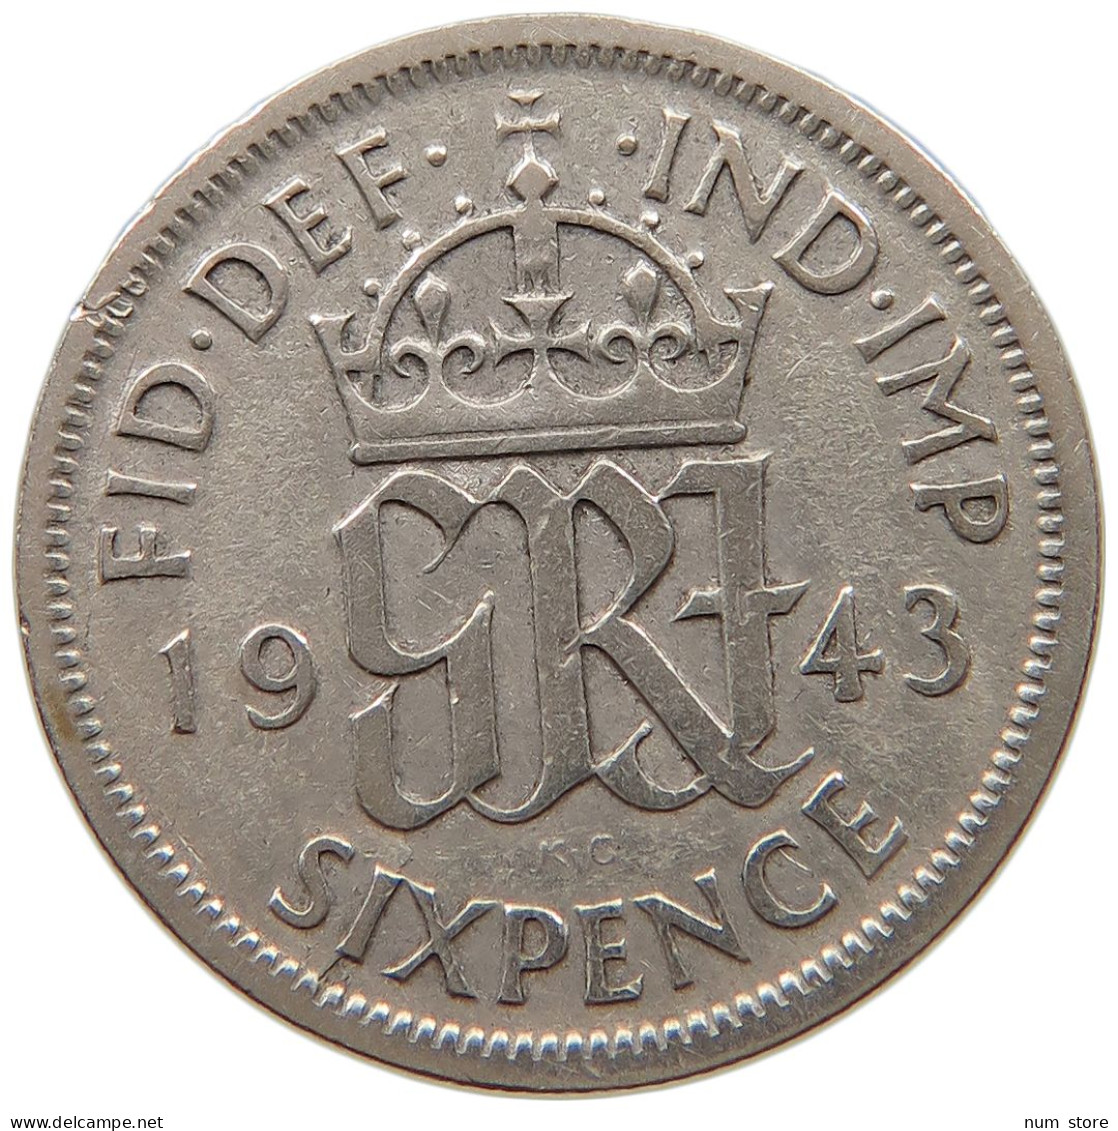 GREAT BRITAIN SIXPENCE 1943 #a045 0649 - H. 6 Pence